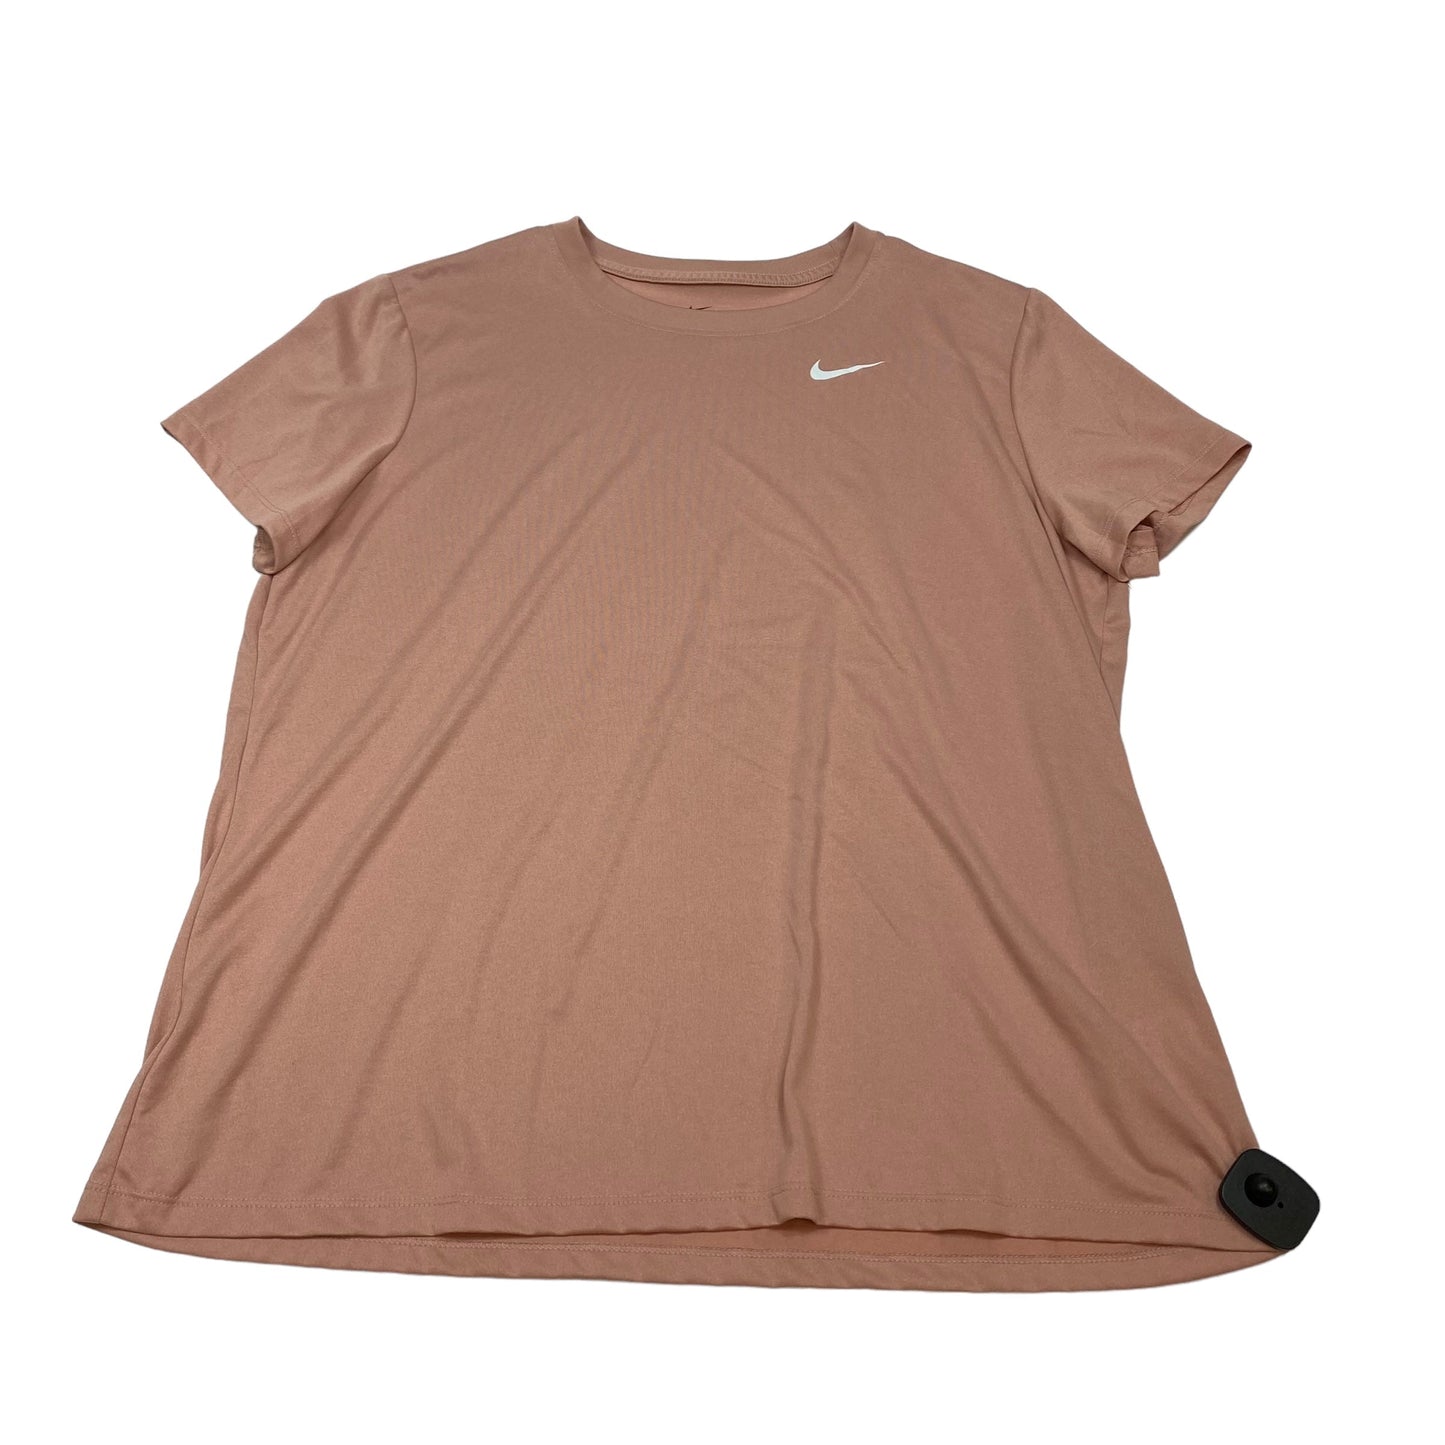 Pink Athletic Top Short Sleeve Nike Apparel, Size Xxl